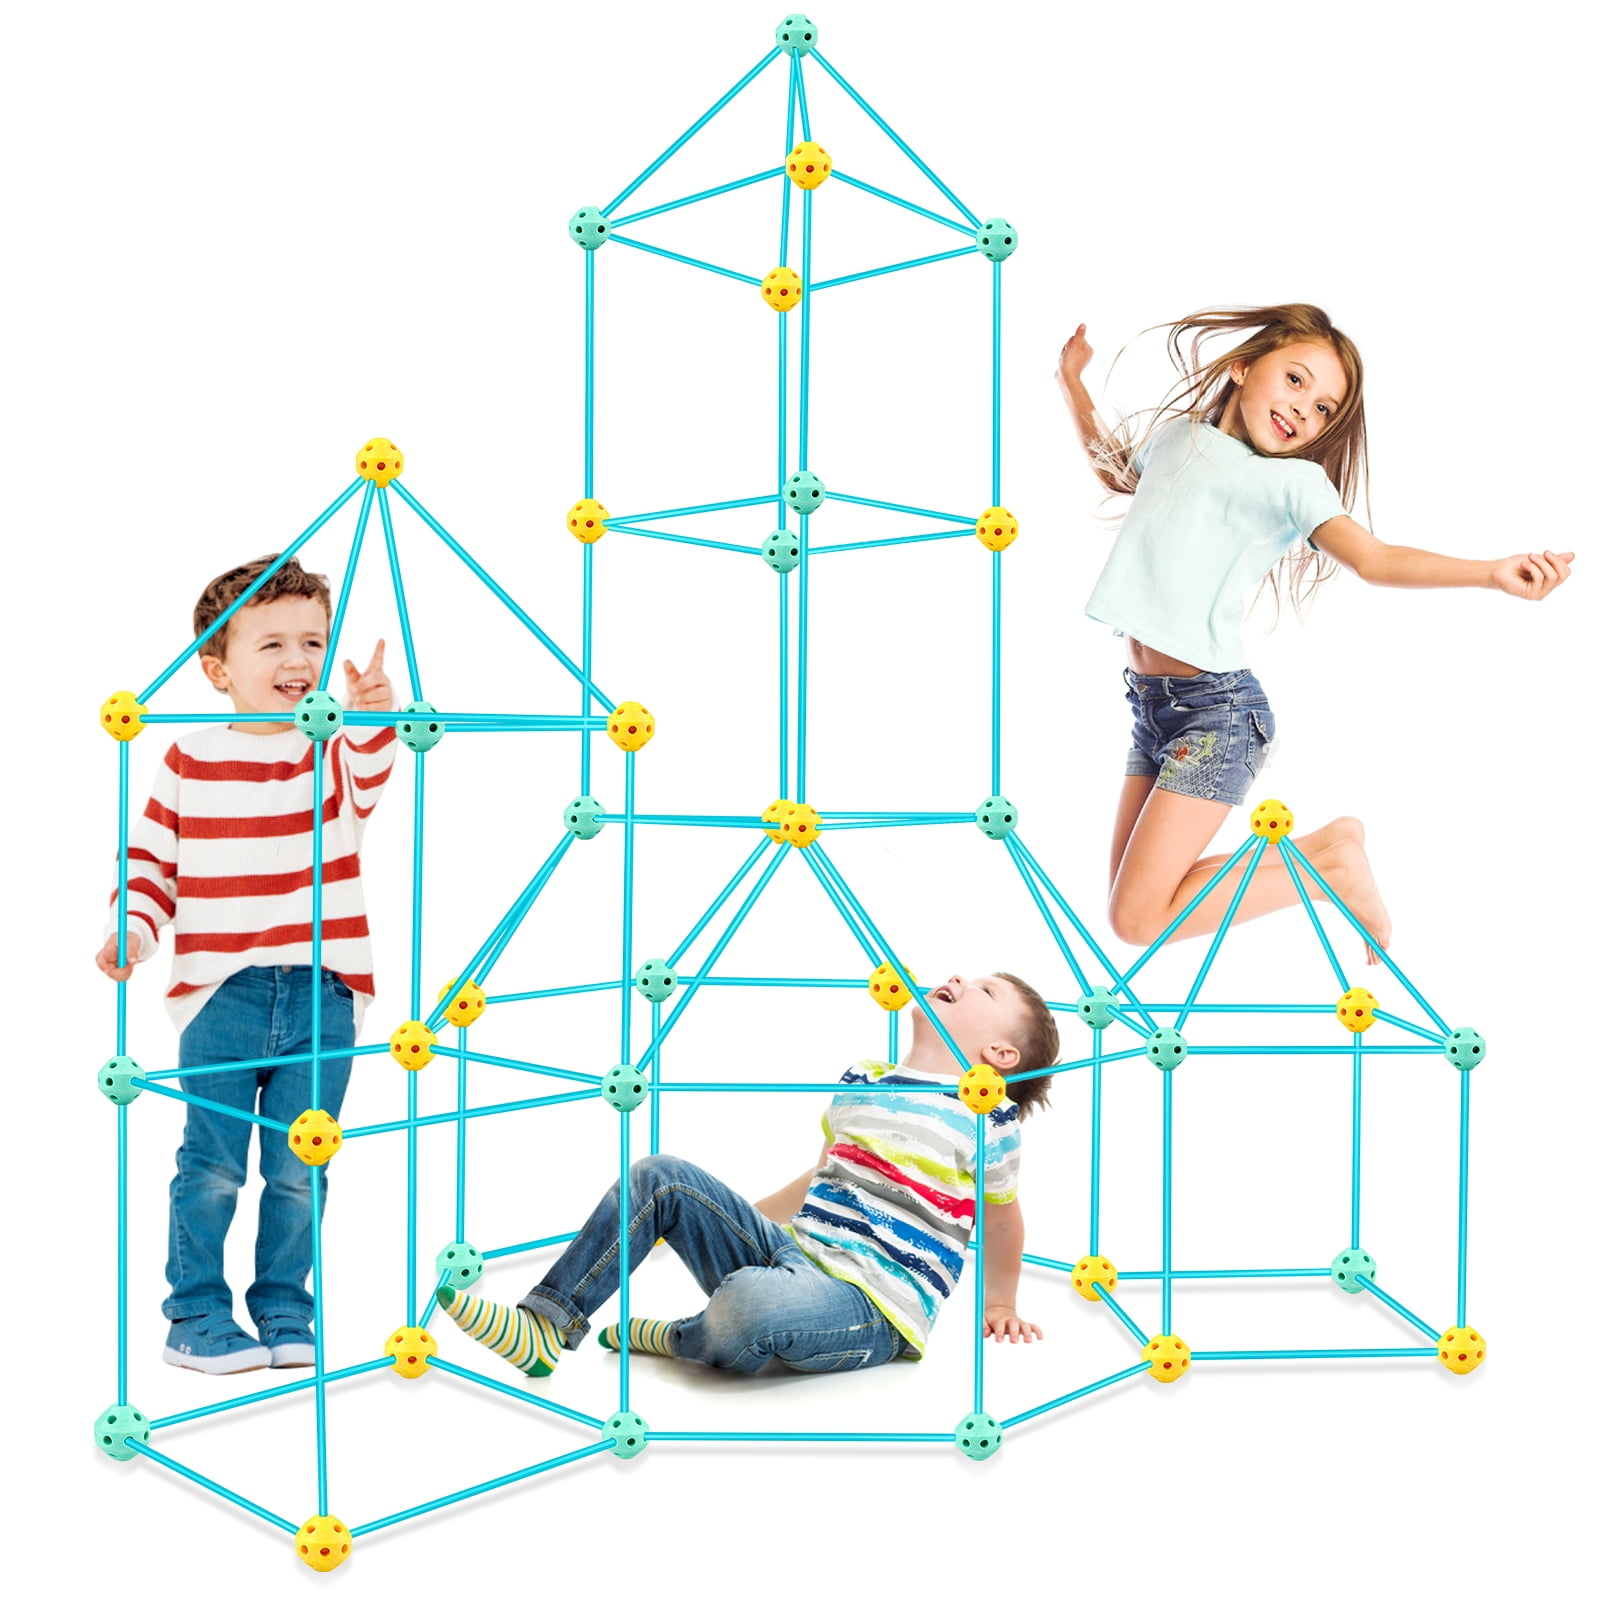 Growsly 140 PCs Fort Building Kit - Creative Construction Kids Toys DIY  Play Tent Castle Toy, for 4-11 Years Old Boys Girls, Light Blue 